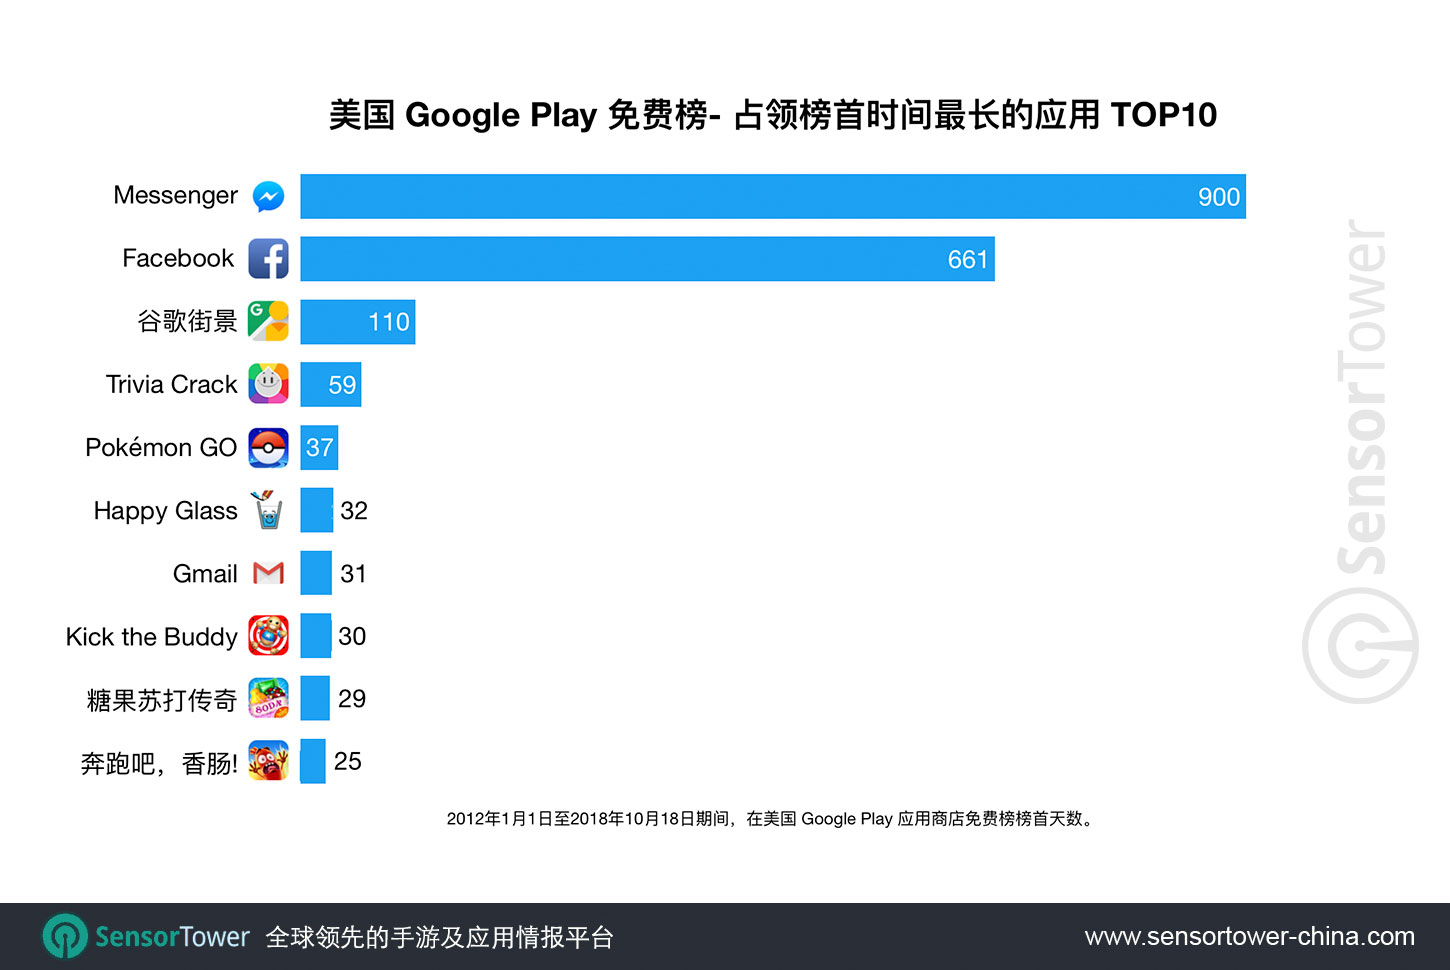 Chart showing a ranking of apps by number of days spent as No. 1 free app on the U.S. Google Play store